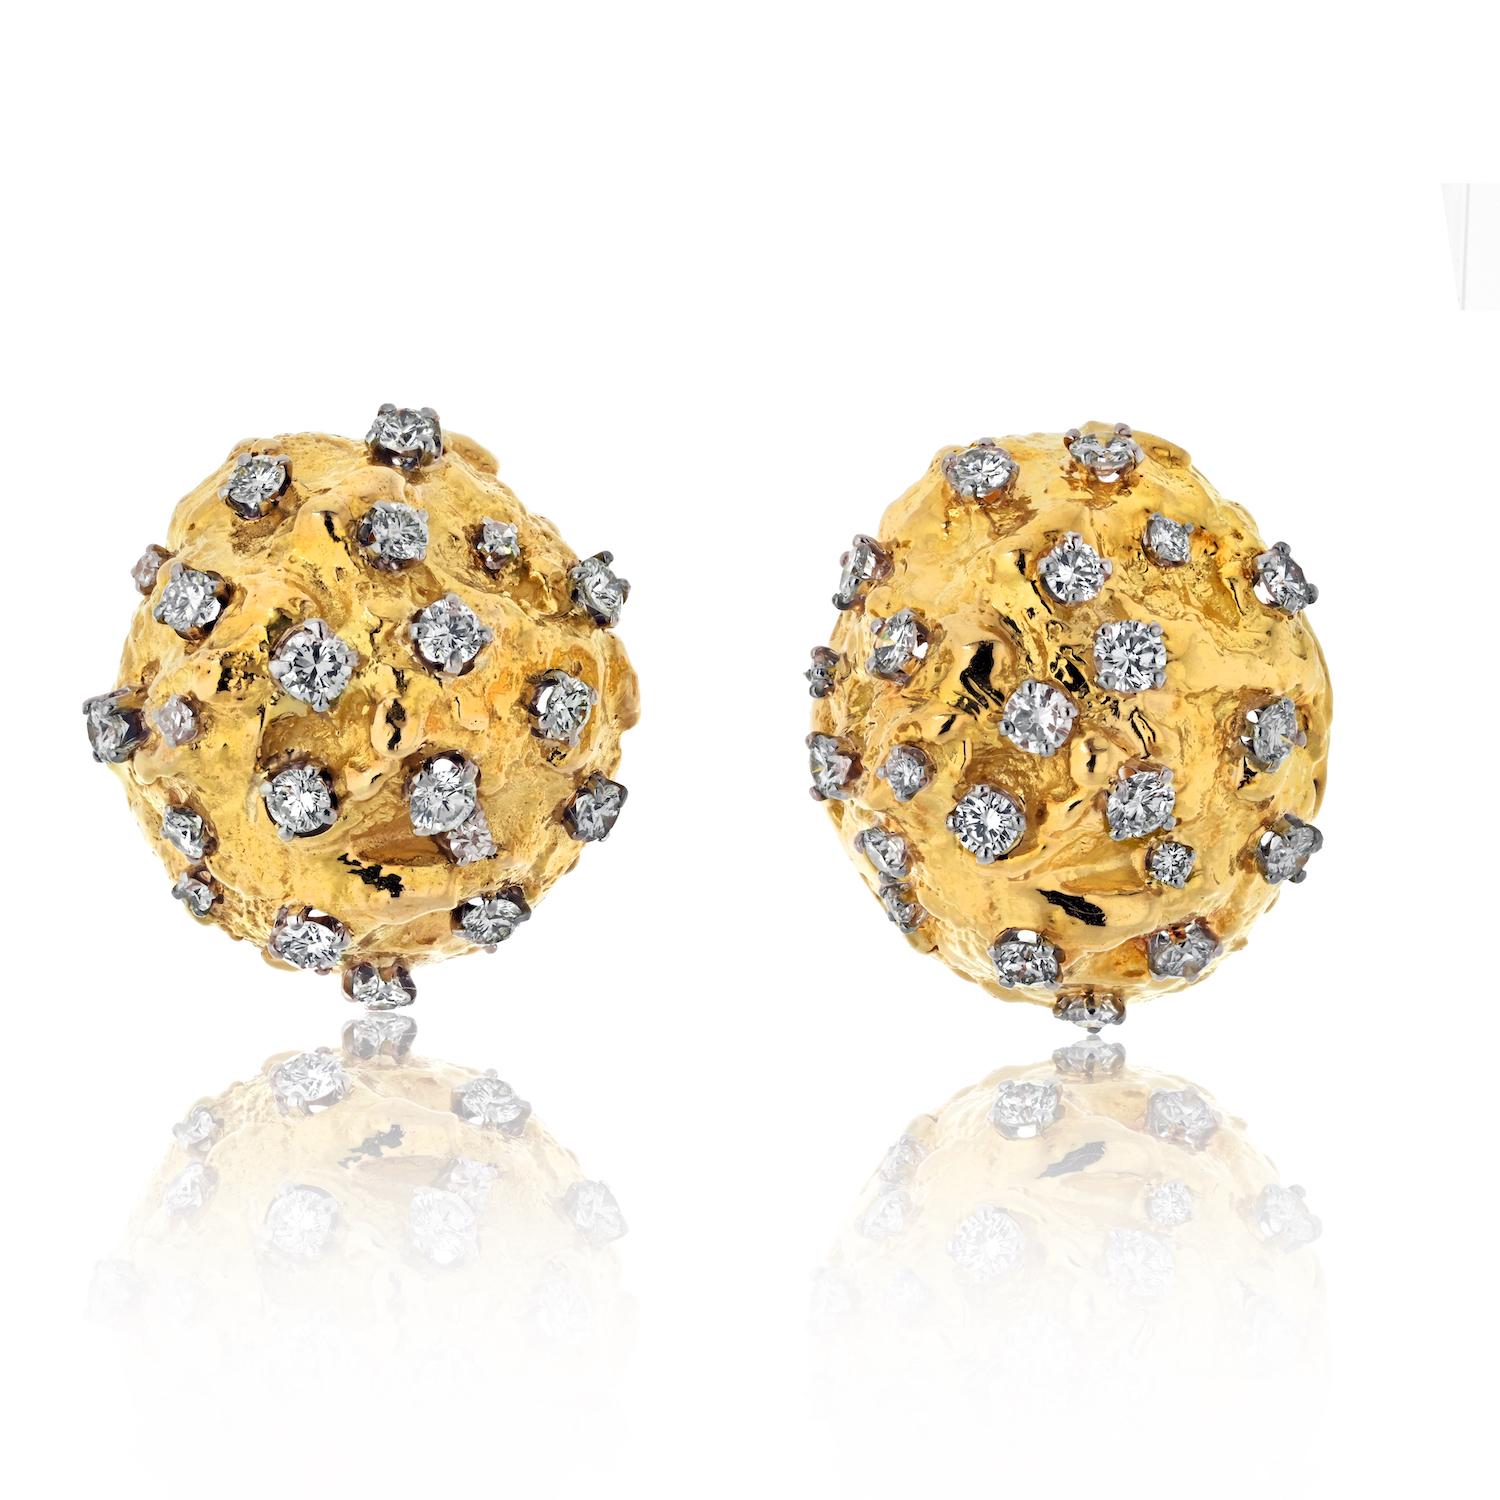 Estate David Webb Platinum & 18K Yellow Gold Clip Earrings: A Glimpse of Timeless Elegance

Elegance is often celebrated in simplicity, and the Estate David Webb Platinum & 18K Yellow Gold Clip Earrings are a testament to this. These exquisite